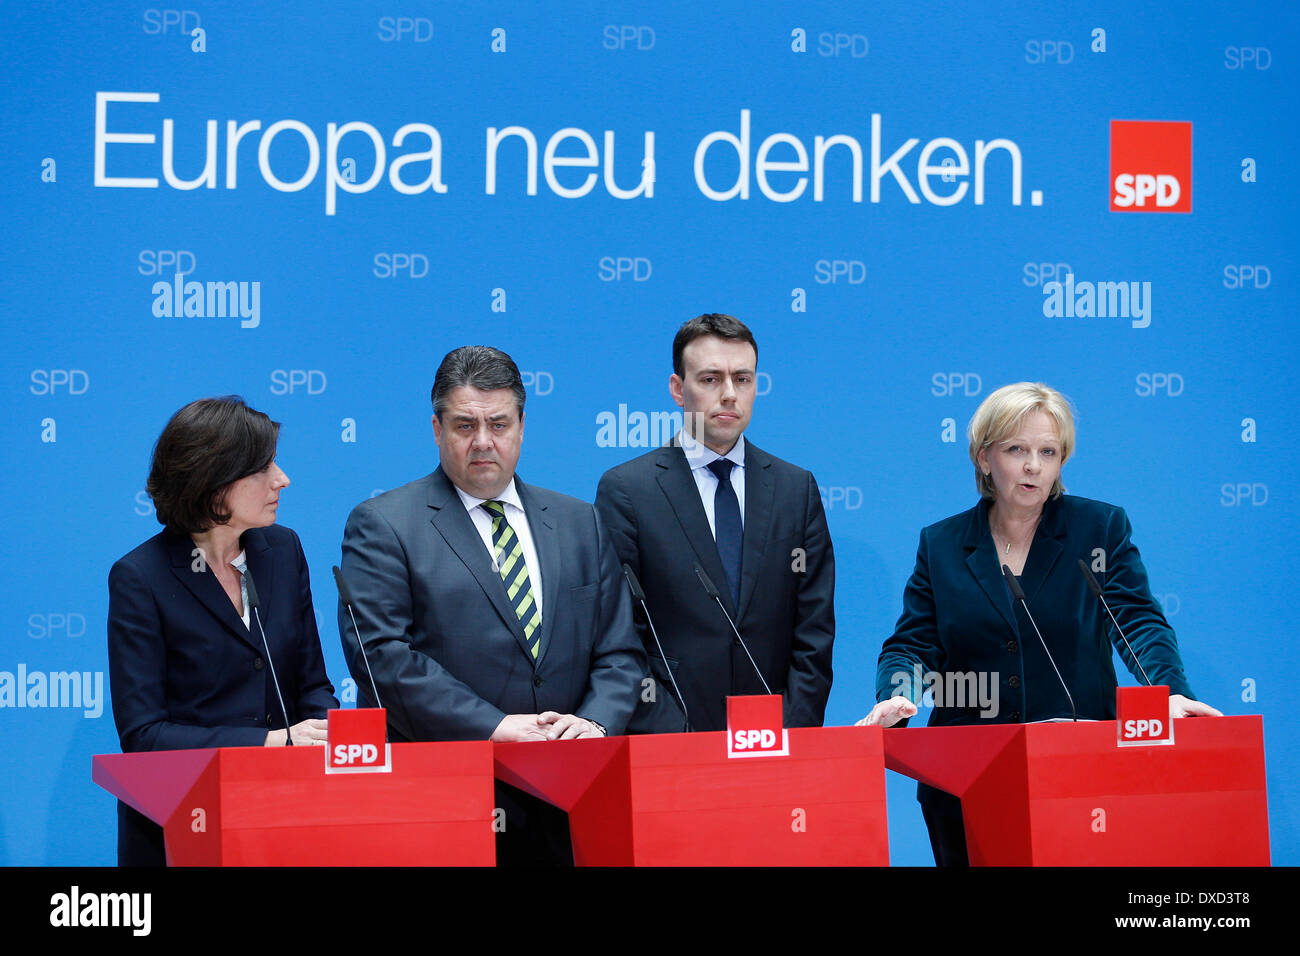 Berlin, Germany. Mars 24th, 2014.Statement on energy policy with Sigmar Gabriel, SPD Chief and Miniter of Economy,  and Hannelore Kraft,Minister-President of North Rhine-Westphalia, and Malu Dreyer, Minister-President of Rhineland-Palatinate, and the Deputy Prime Minister of Baden-WŸrttemberg Nils Schmid at Willy-Brandt-Haus in Berlin. / Picture: Sigmar Gabriel, SPD Chief and Miniter of Economy,  and Hannelore Kraft,Minister-President of North Rhine-Westphalia, and Malu Dreyer, Minister-President of Rhineland-Palatinate, and the Deputy Prime Minister of Baden-WŸrttemberg Nils Schmid Stock Photo